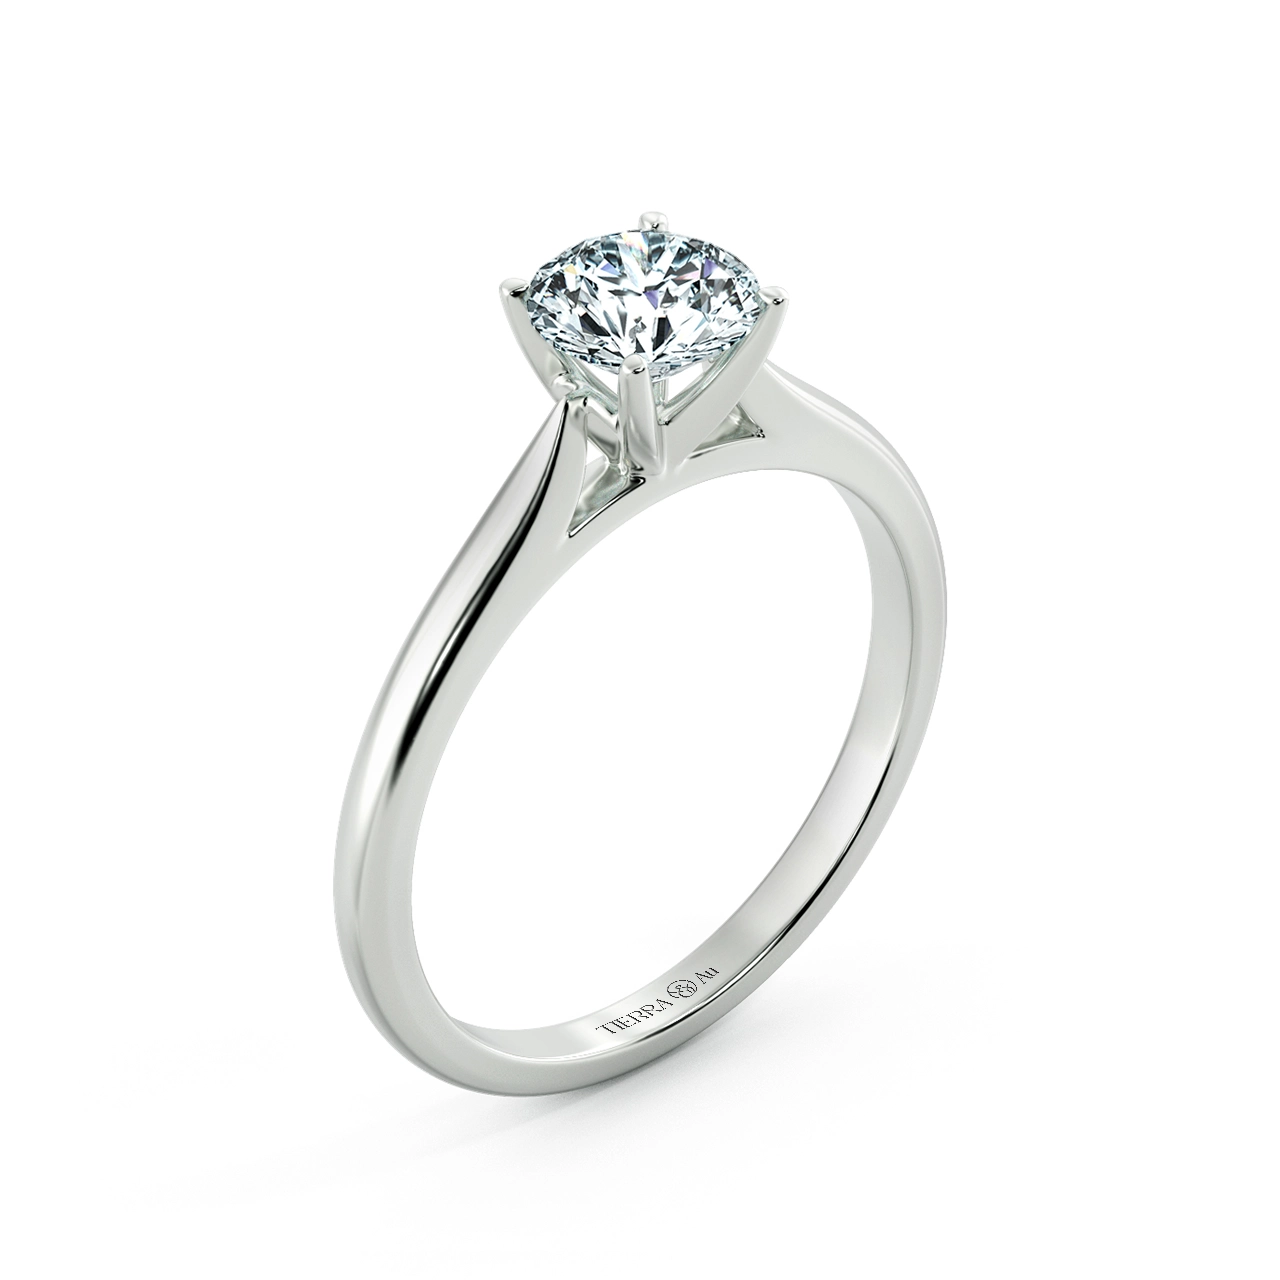 Basic Shiny Cathedral Engagement Ring with Four Prong Setting NCH1501 4